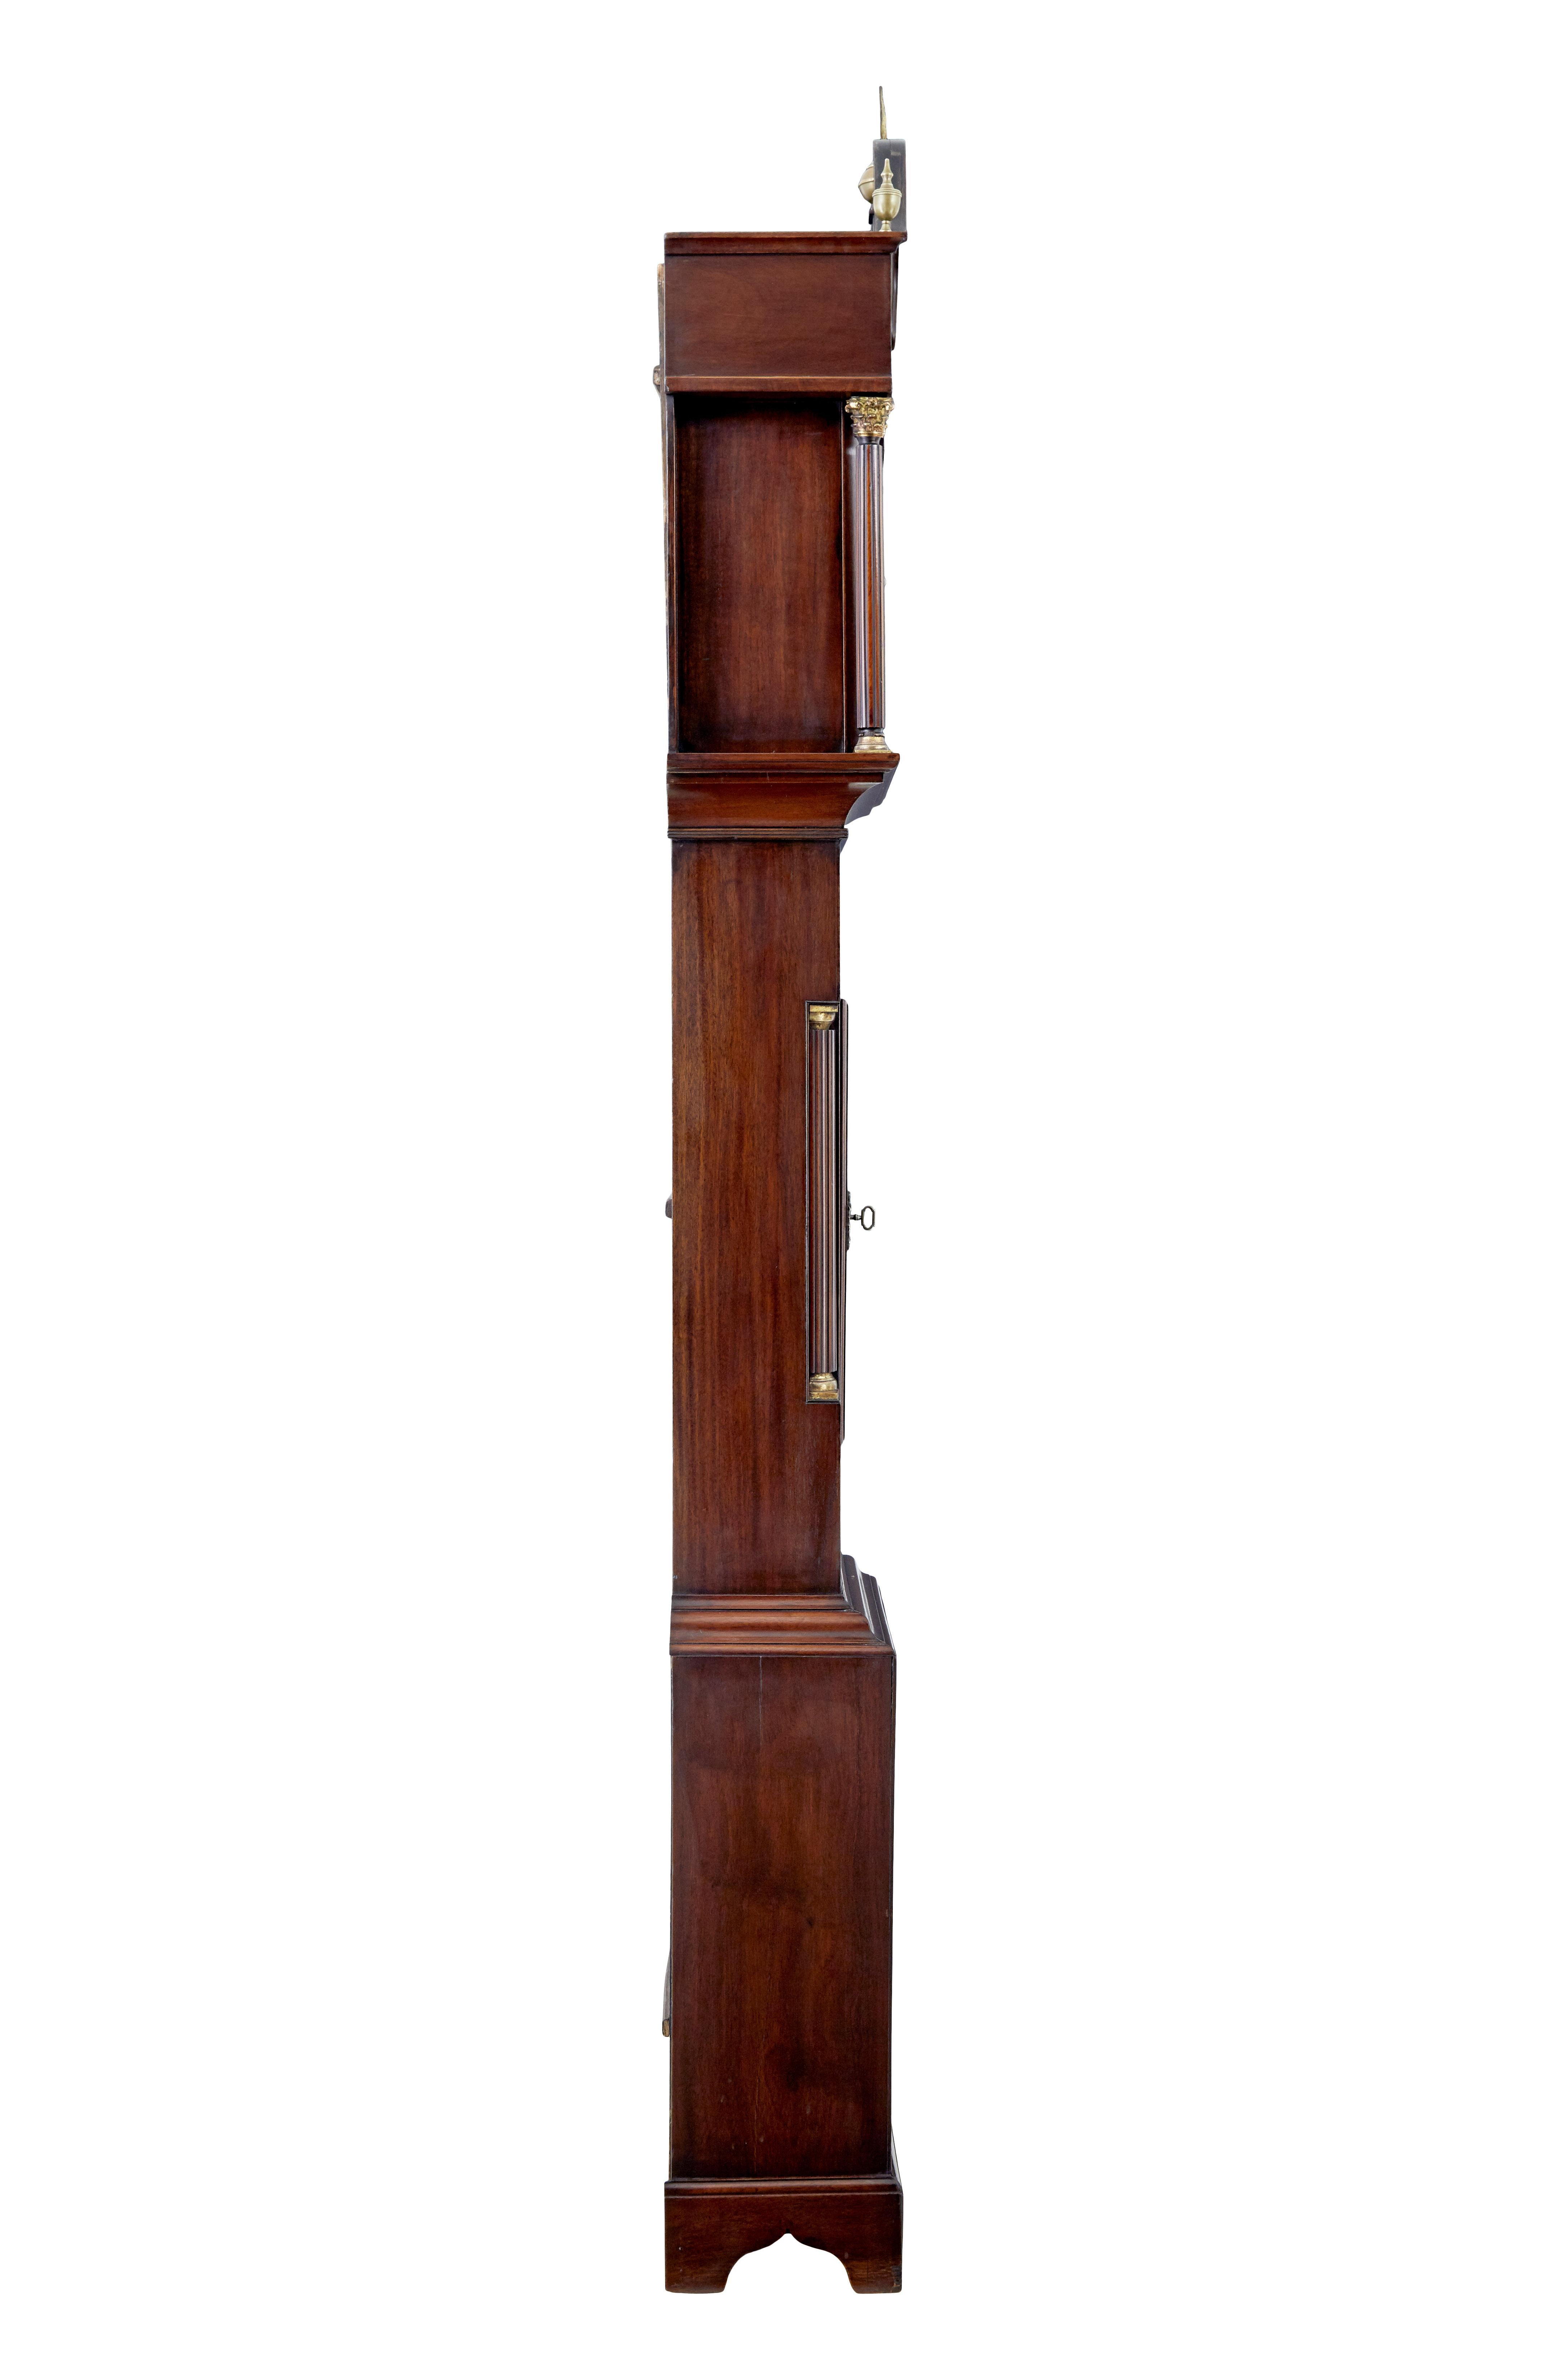 English 18th century inlaid mahogany long case clock by William Underwood For Sale